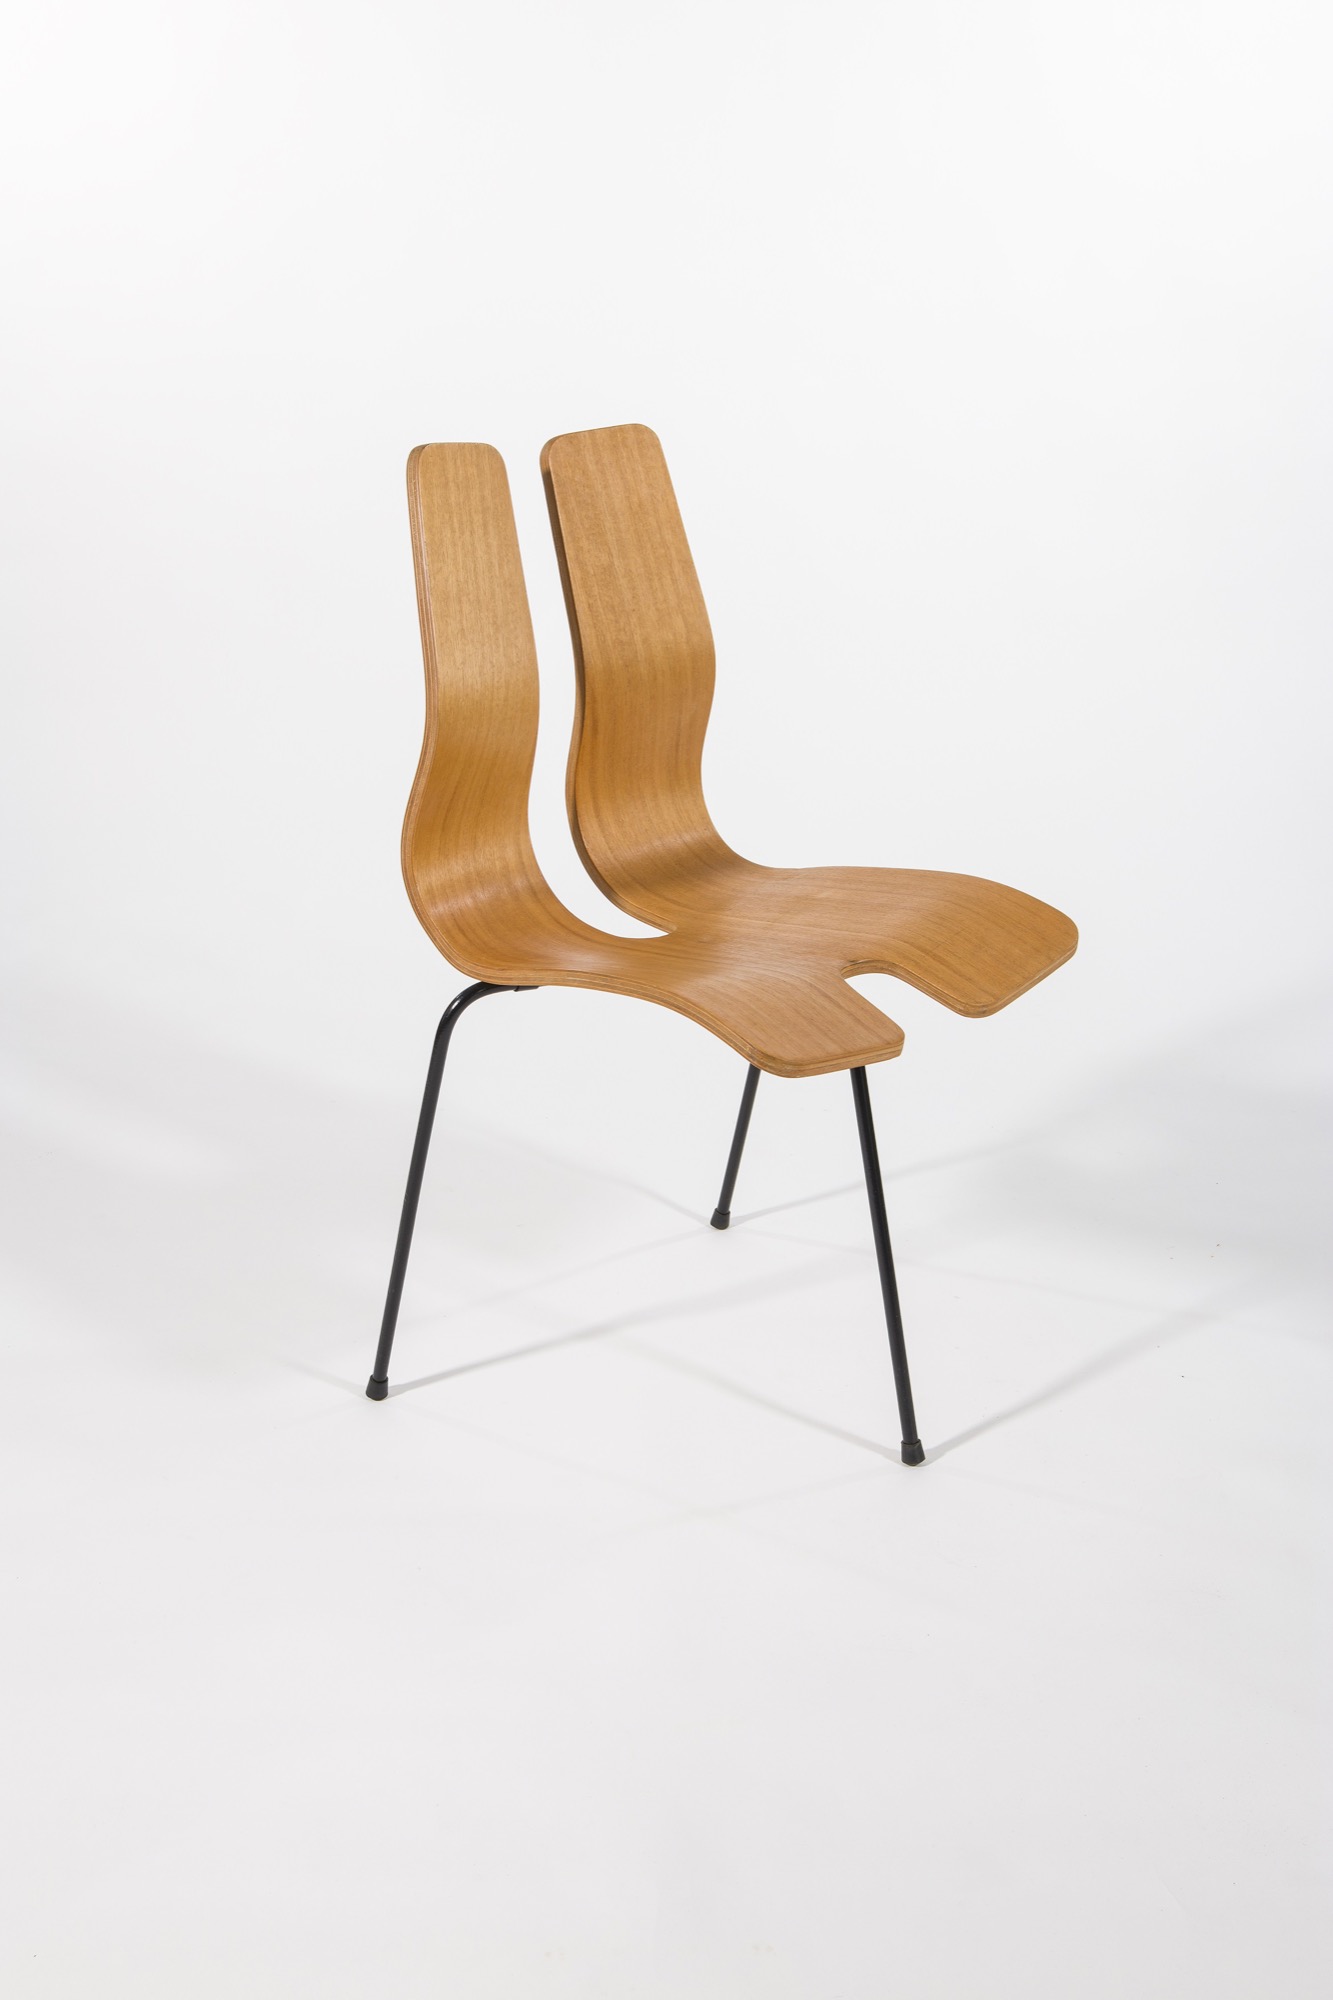 Clement Meadmore, <em>Three-legged plywood chair</em>, 1955, painted steel, plywood, rubber. Harris/Atkins Collection.